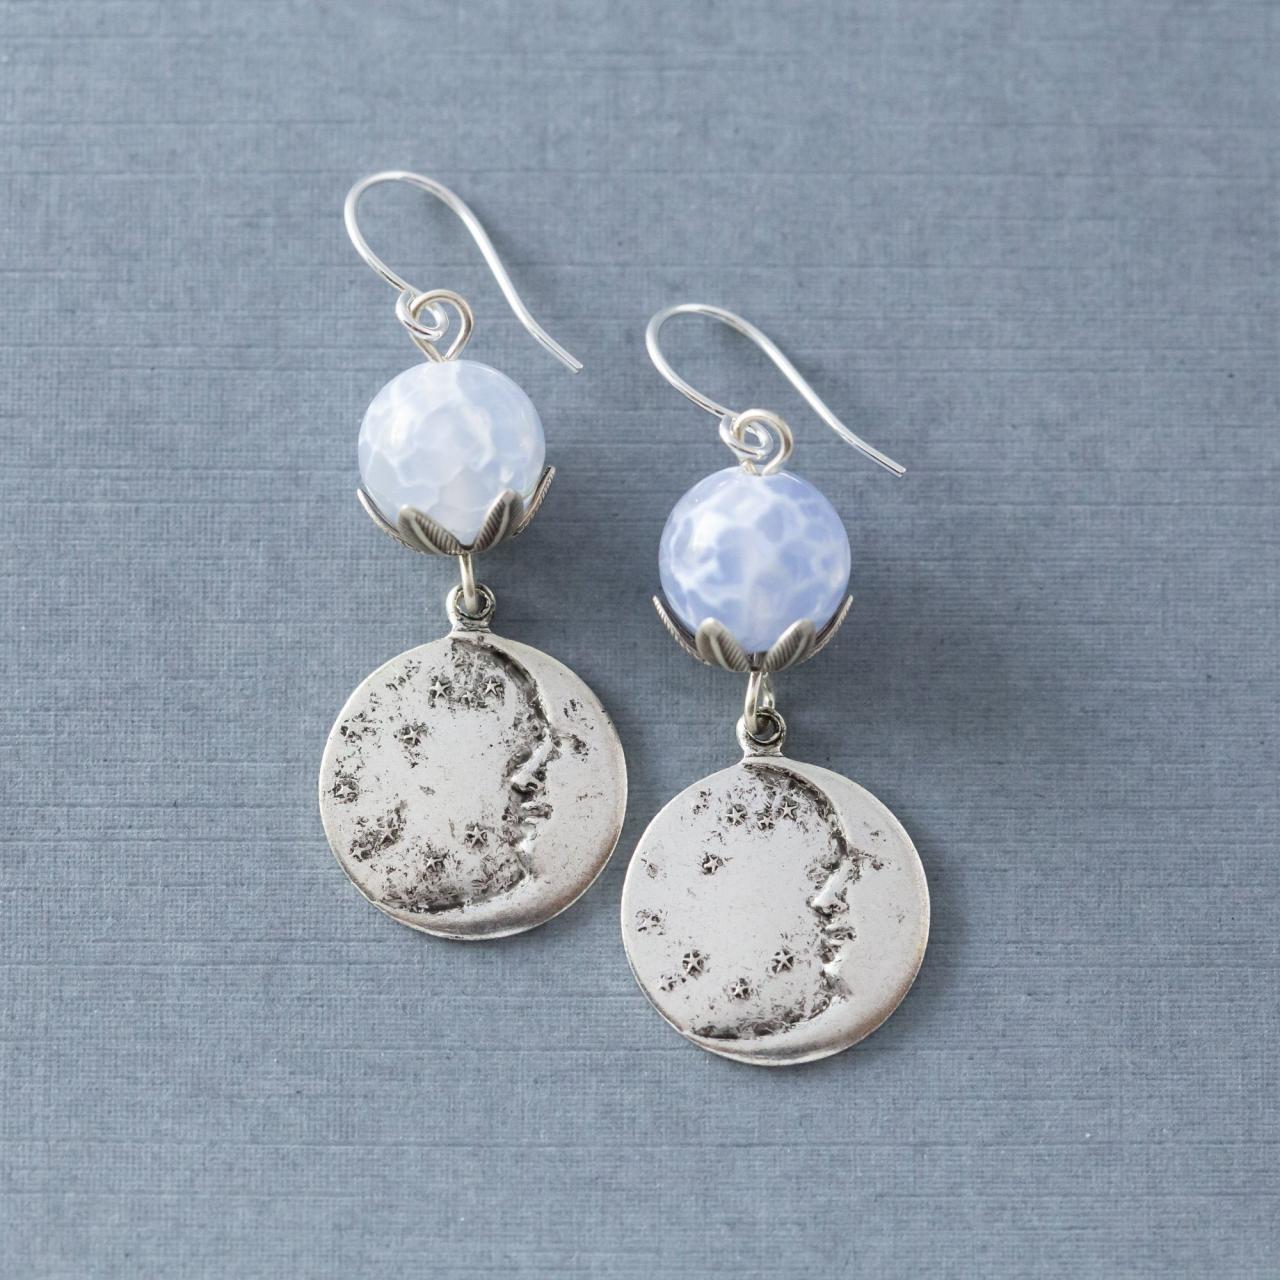 Silver Tone Crescent Moon And Stars Blue Agate Dangle Earrings, Celestial Jewelry